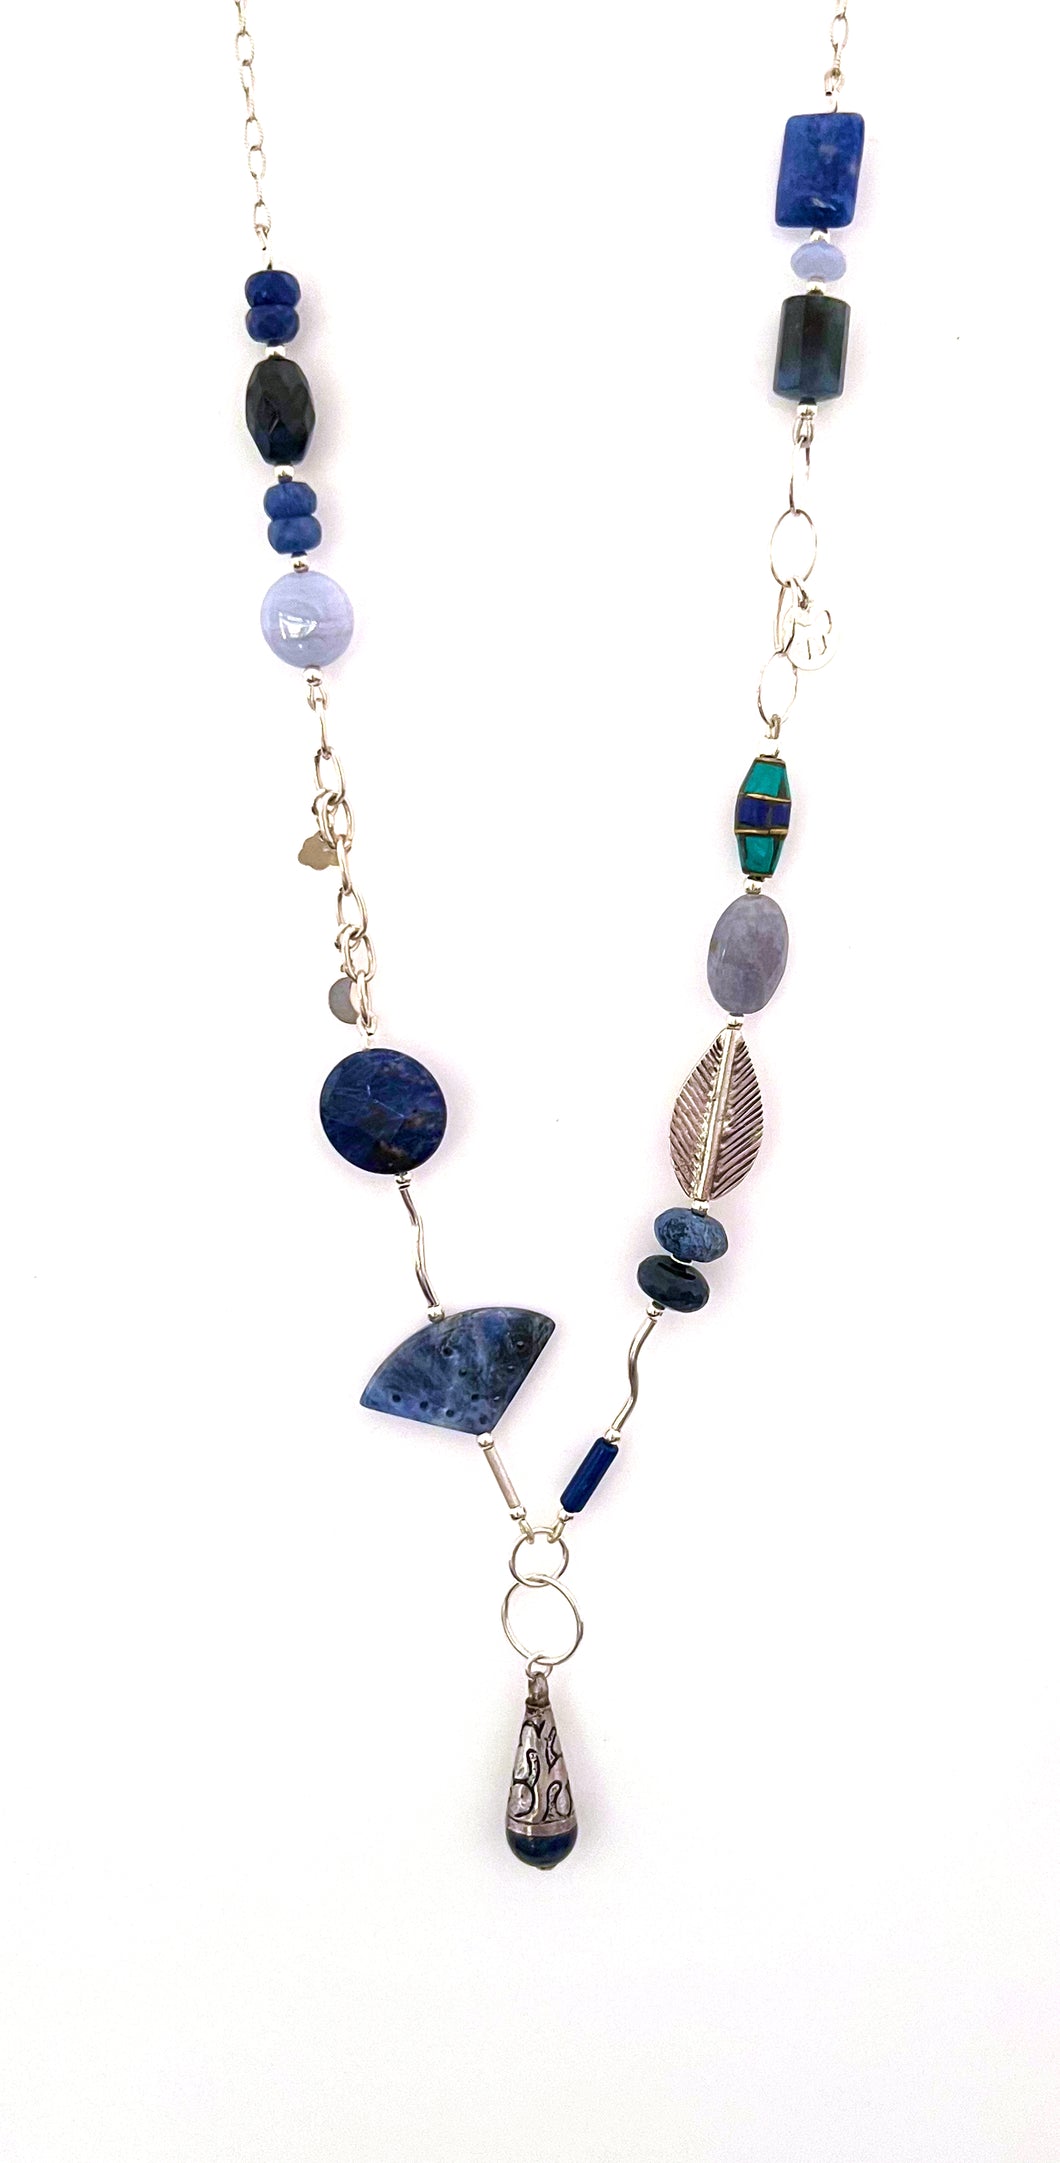 Australian Handmade Blue Necklace with Dumortierite Sodalite Blue Lace Agate Nepalese Bead Tibetan Bead and Sterling Silver